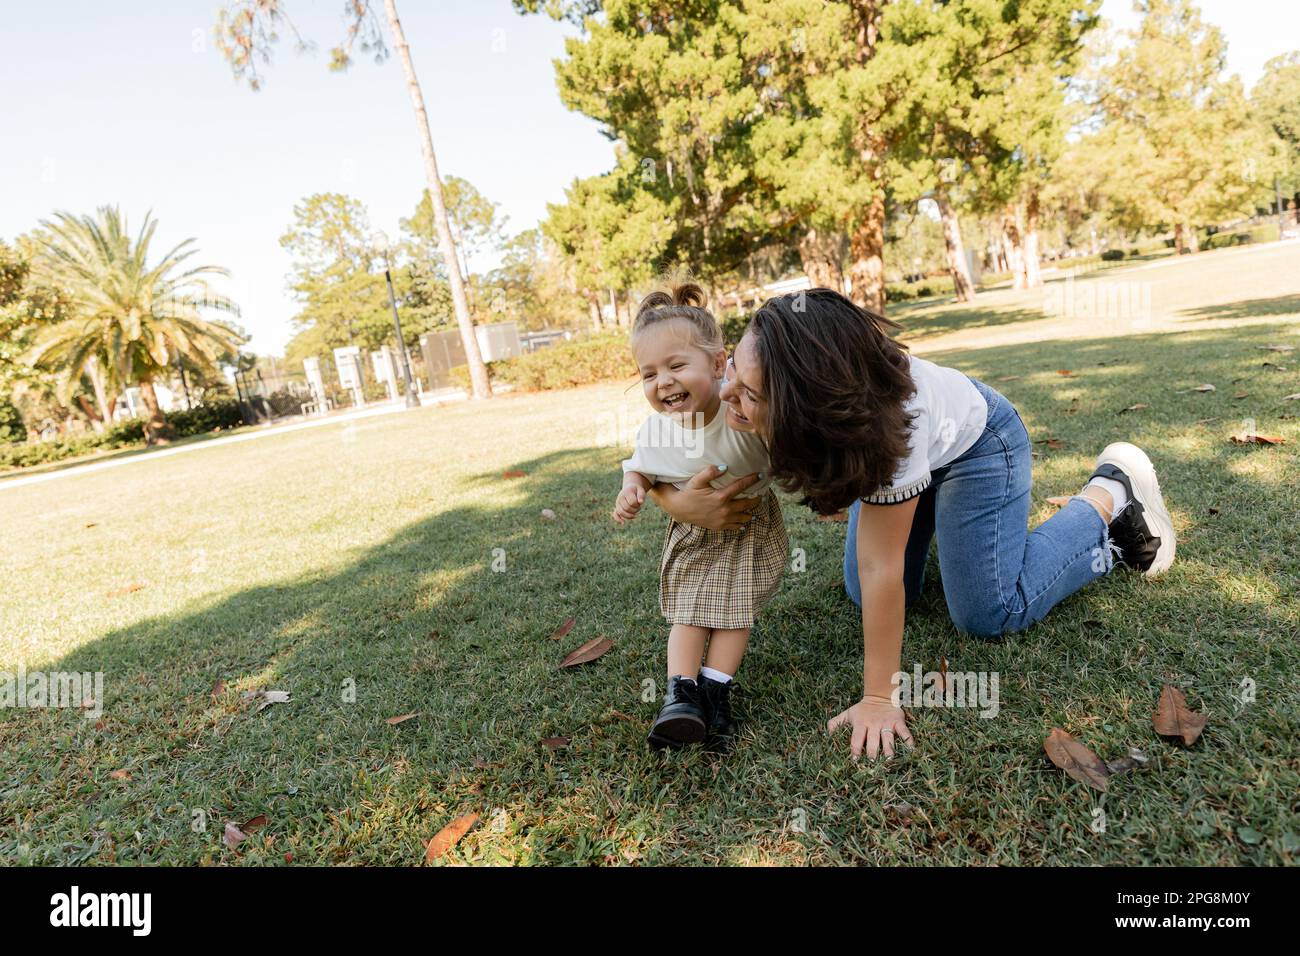 toddler girl laughing with happy mother while playing together in Miami park,stock image Stock Photo